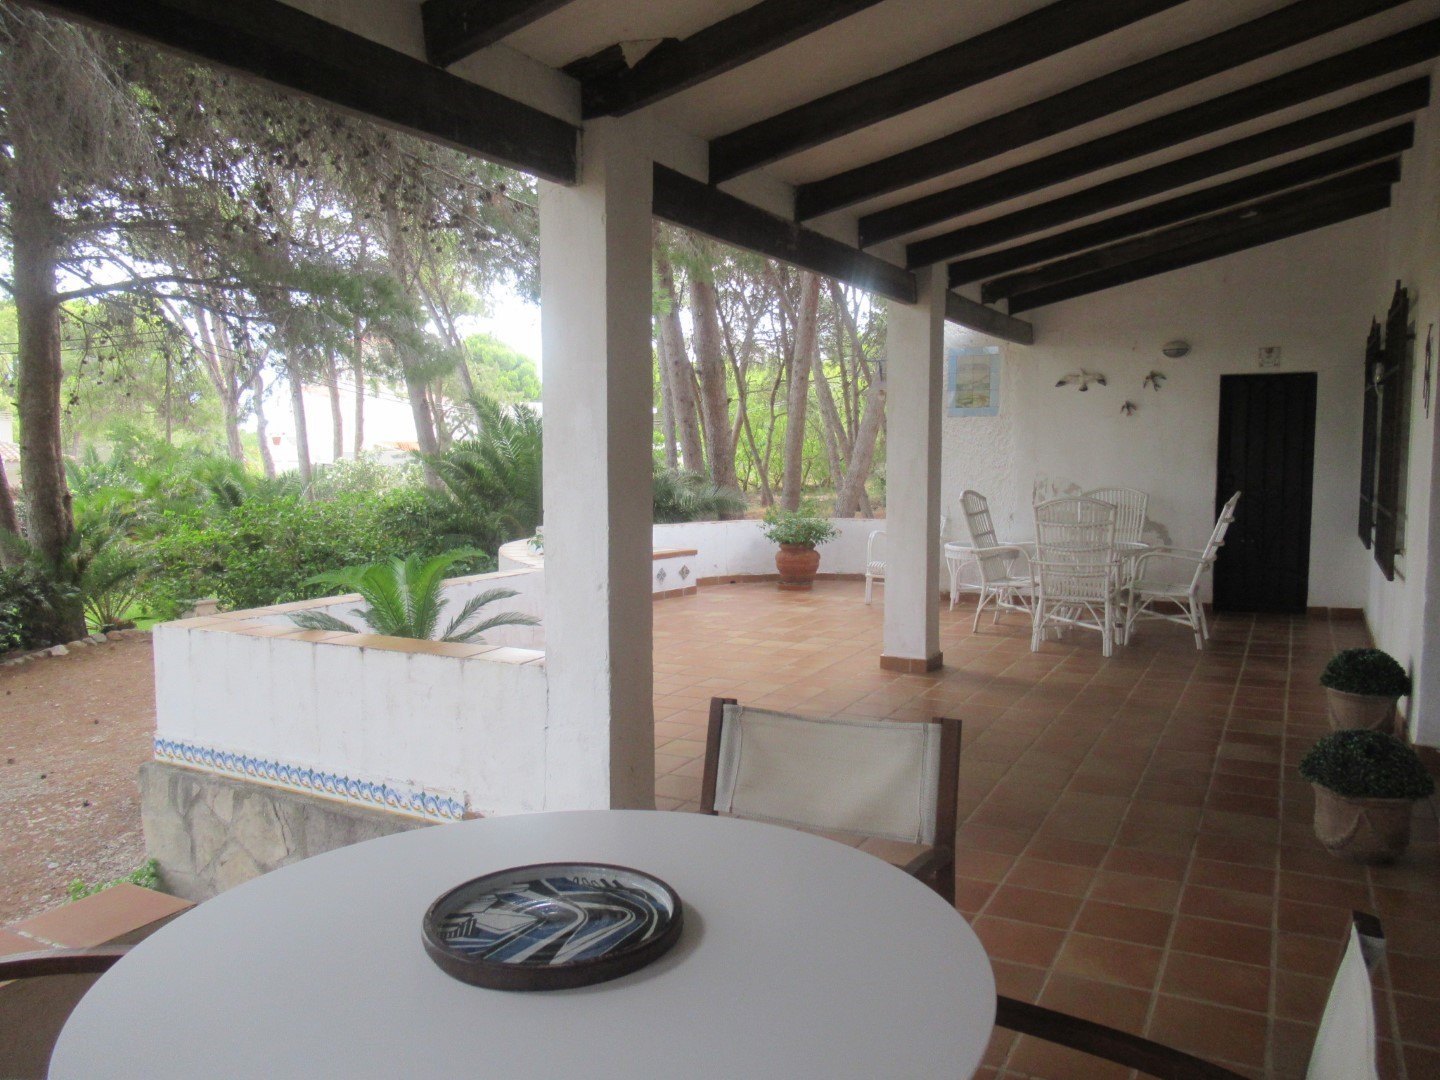 Villa for sale in Las Rotas Denia with large plot of land